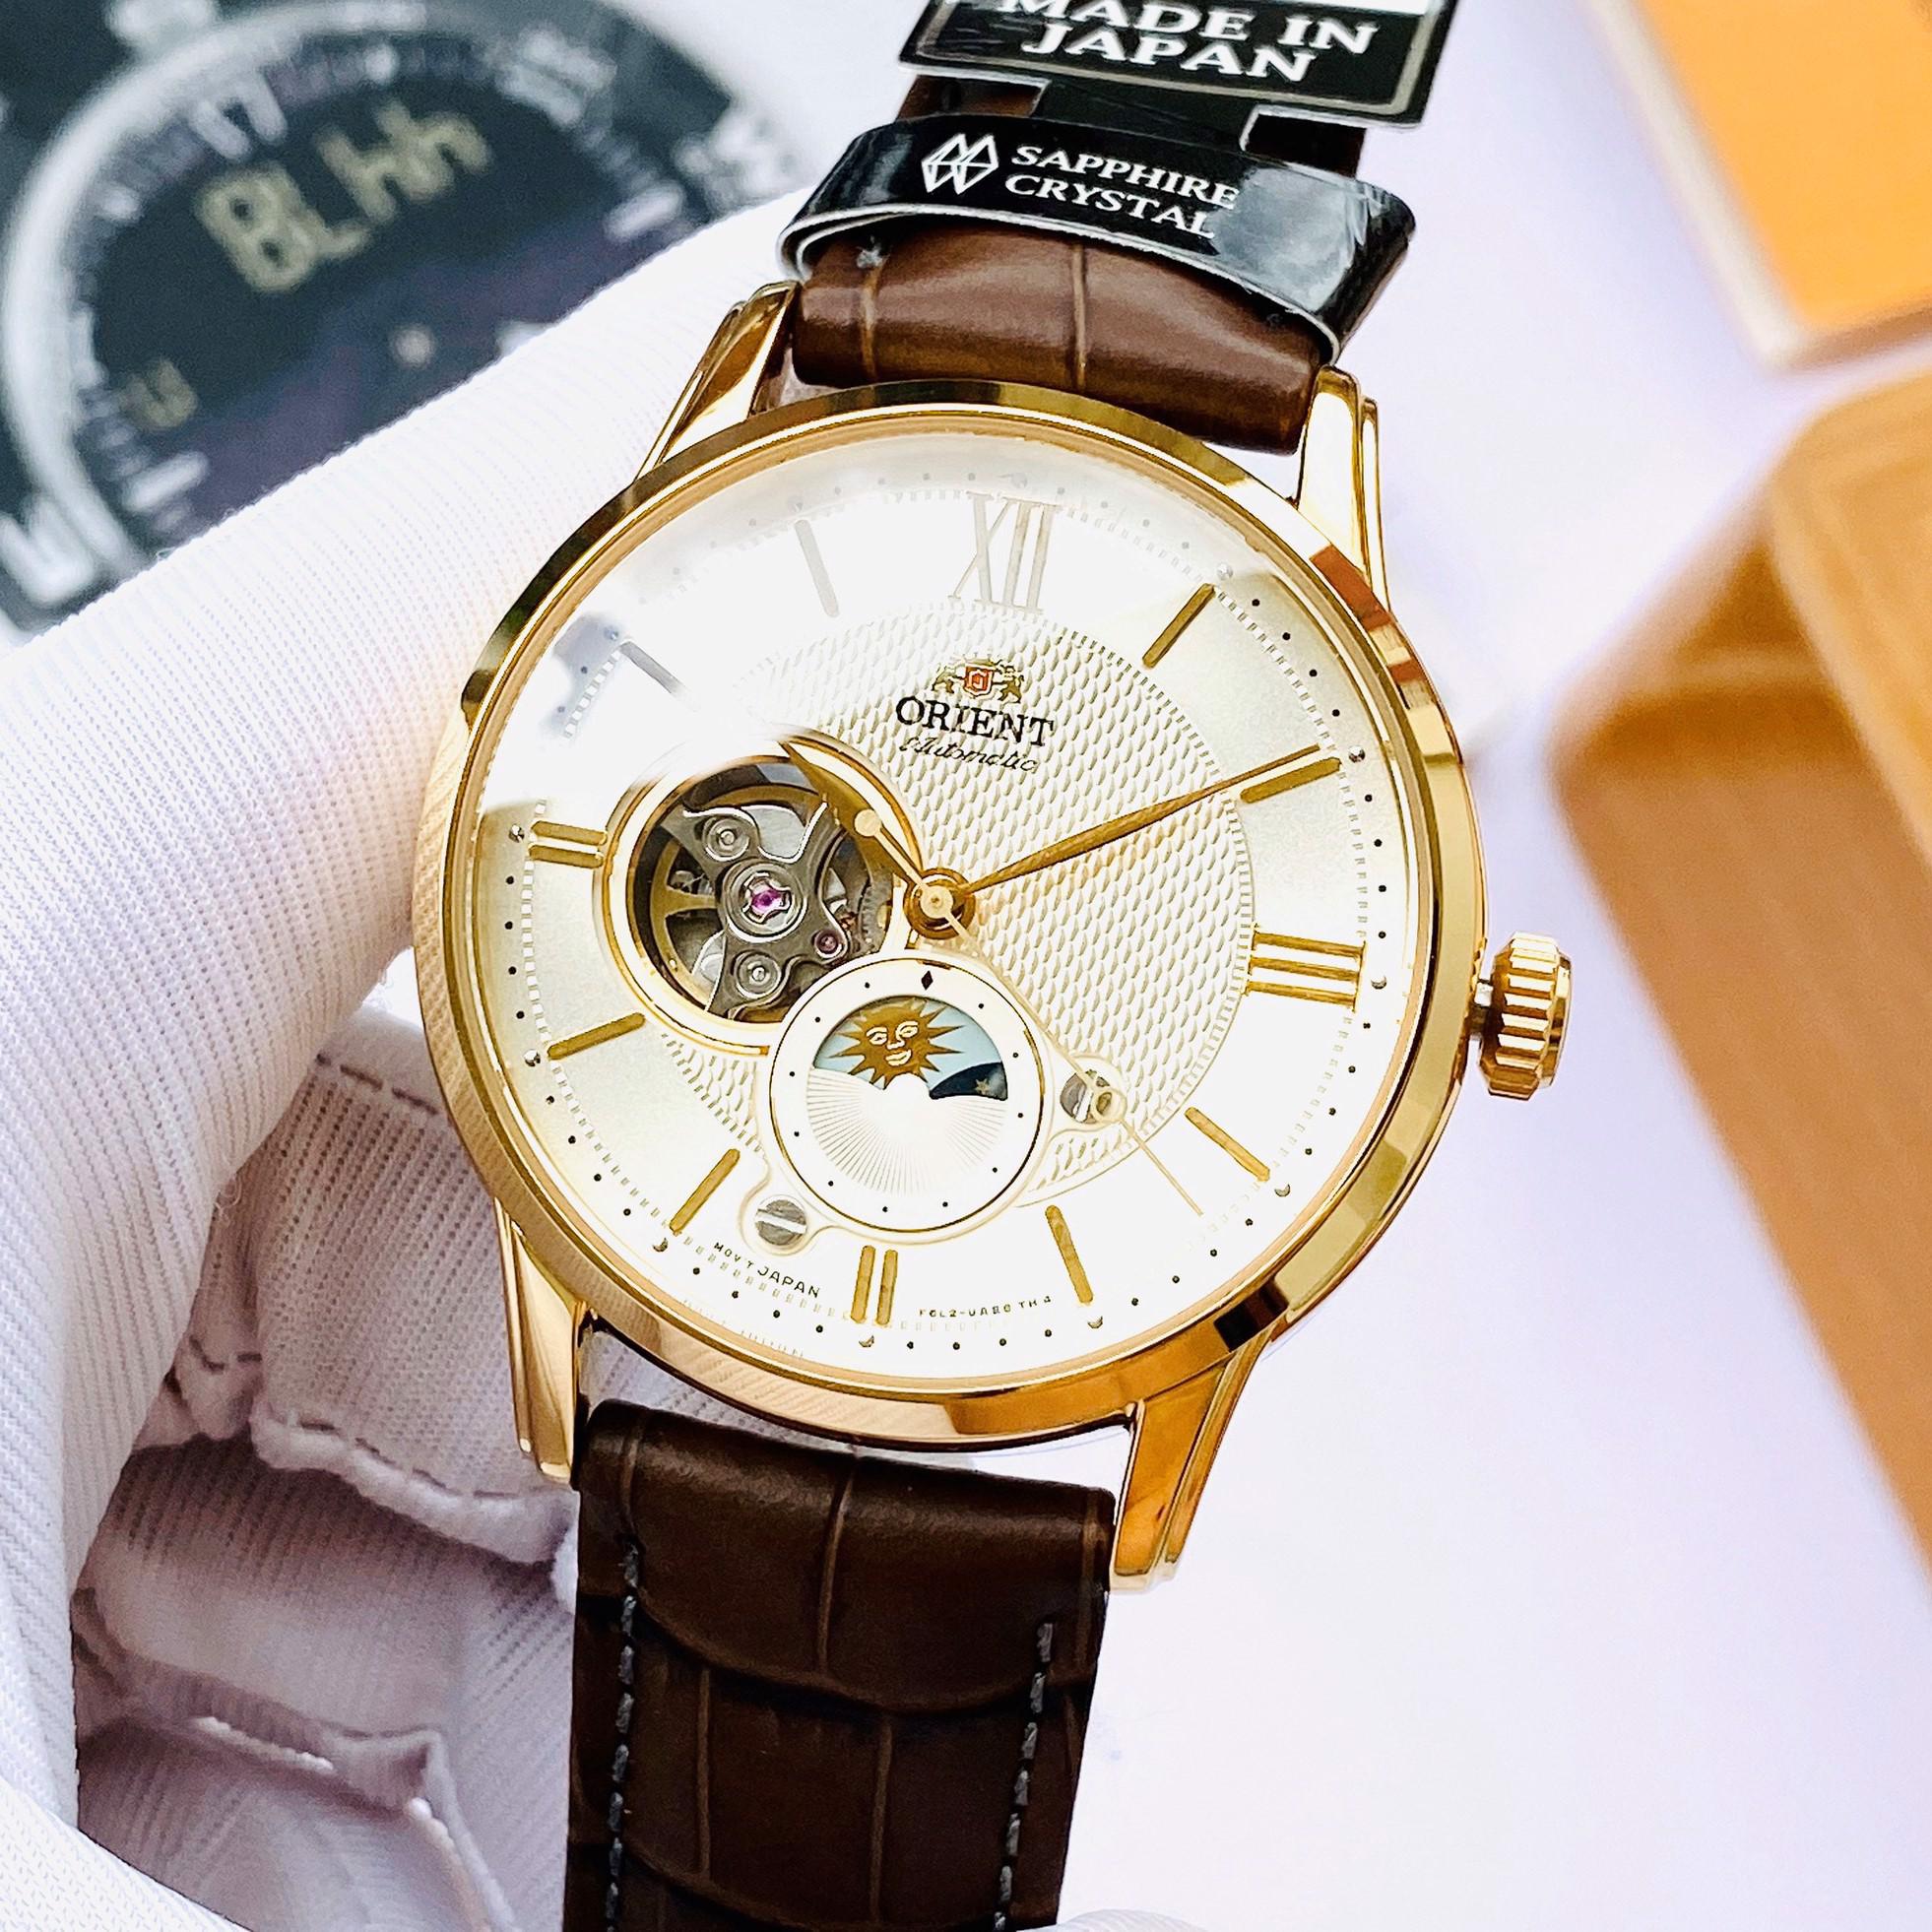 Thiết kế của đồng hồ Orient secondhand